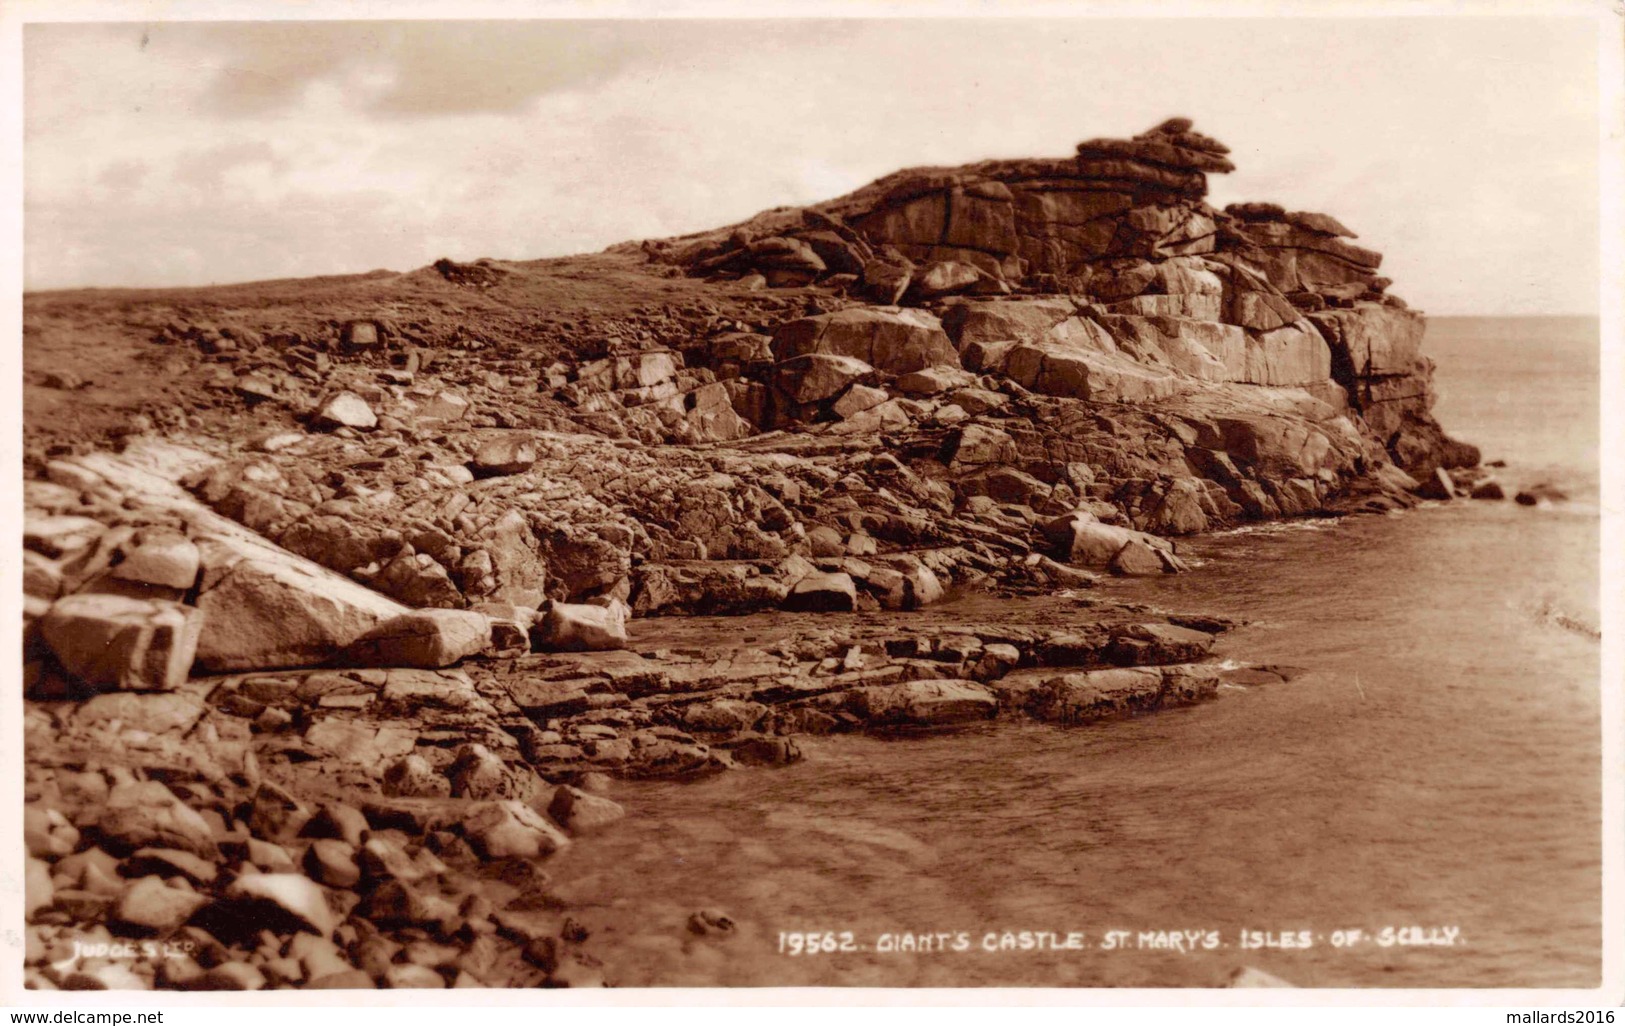 ISLES OF SCILLY - GIANTS CASTLE, ST. MARY'S - POSTED IN 1959 #82837 - Scilly Isles